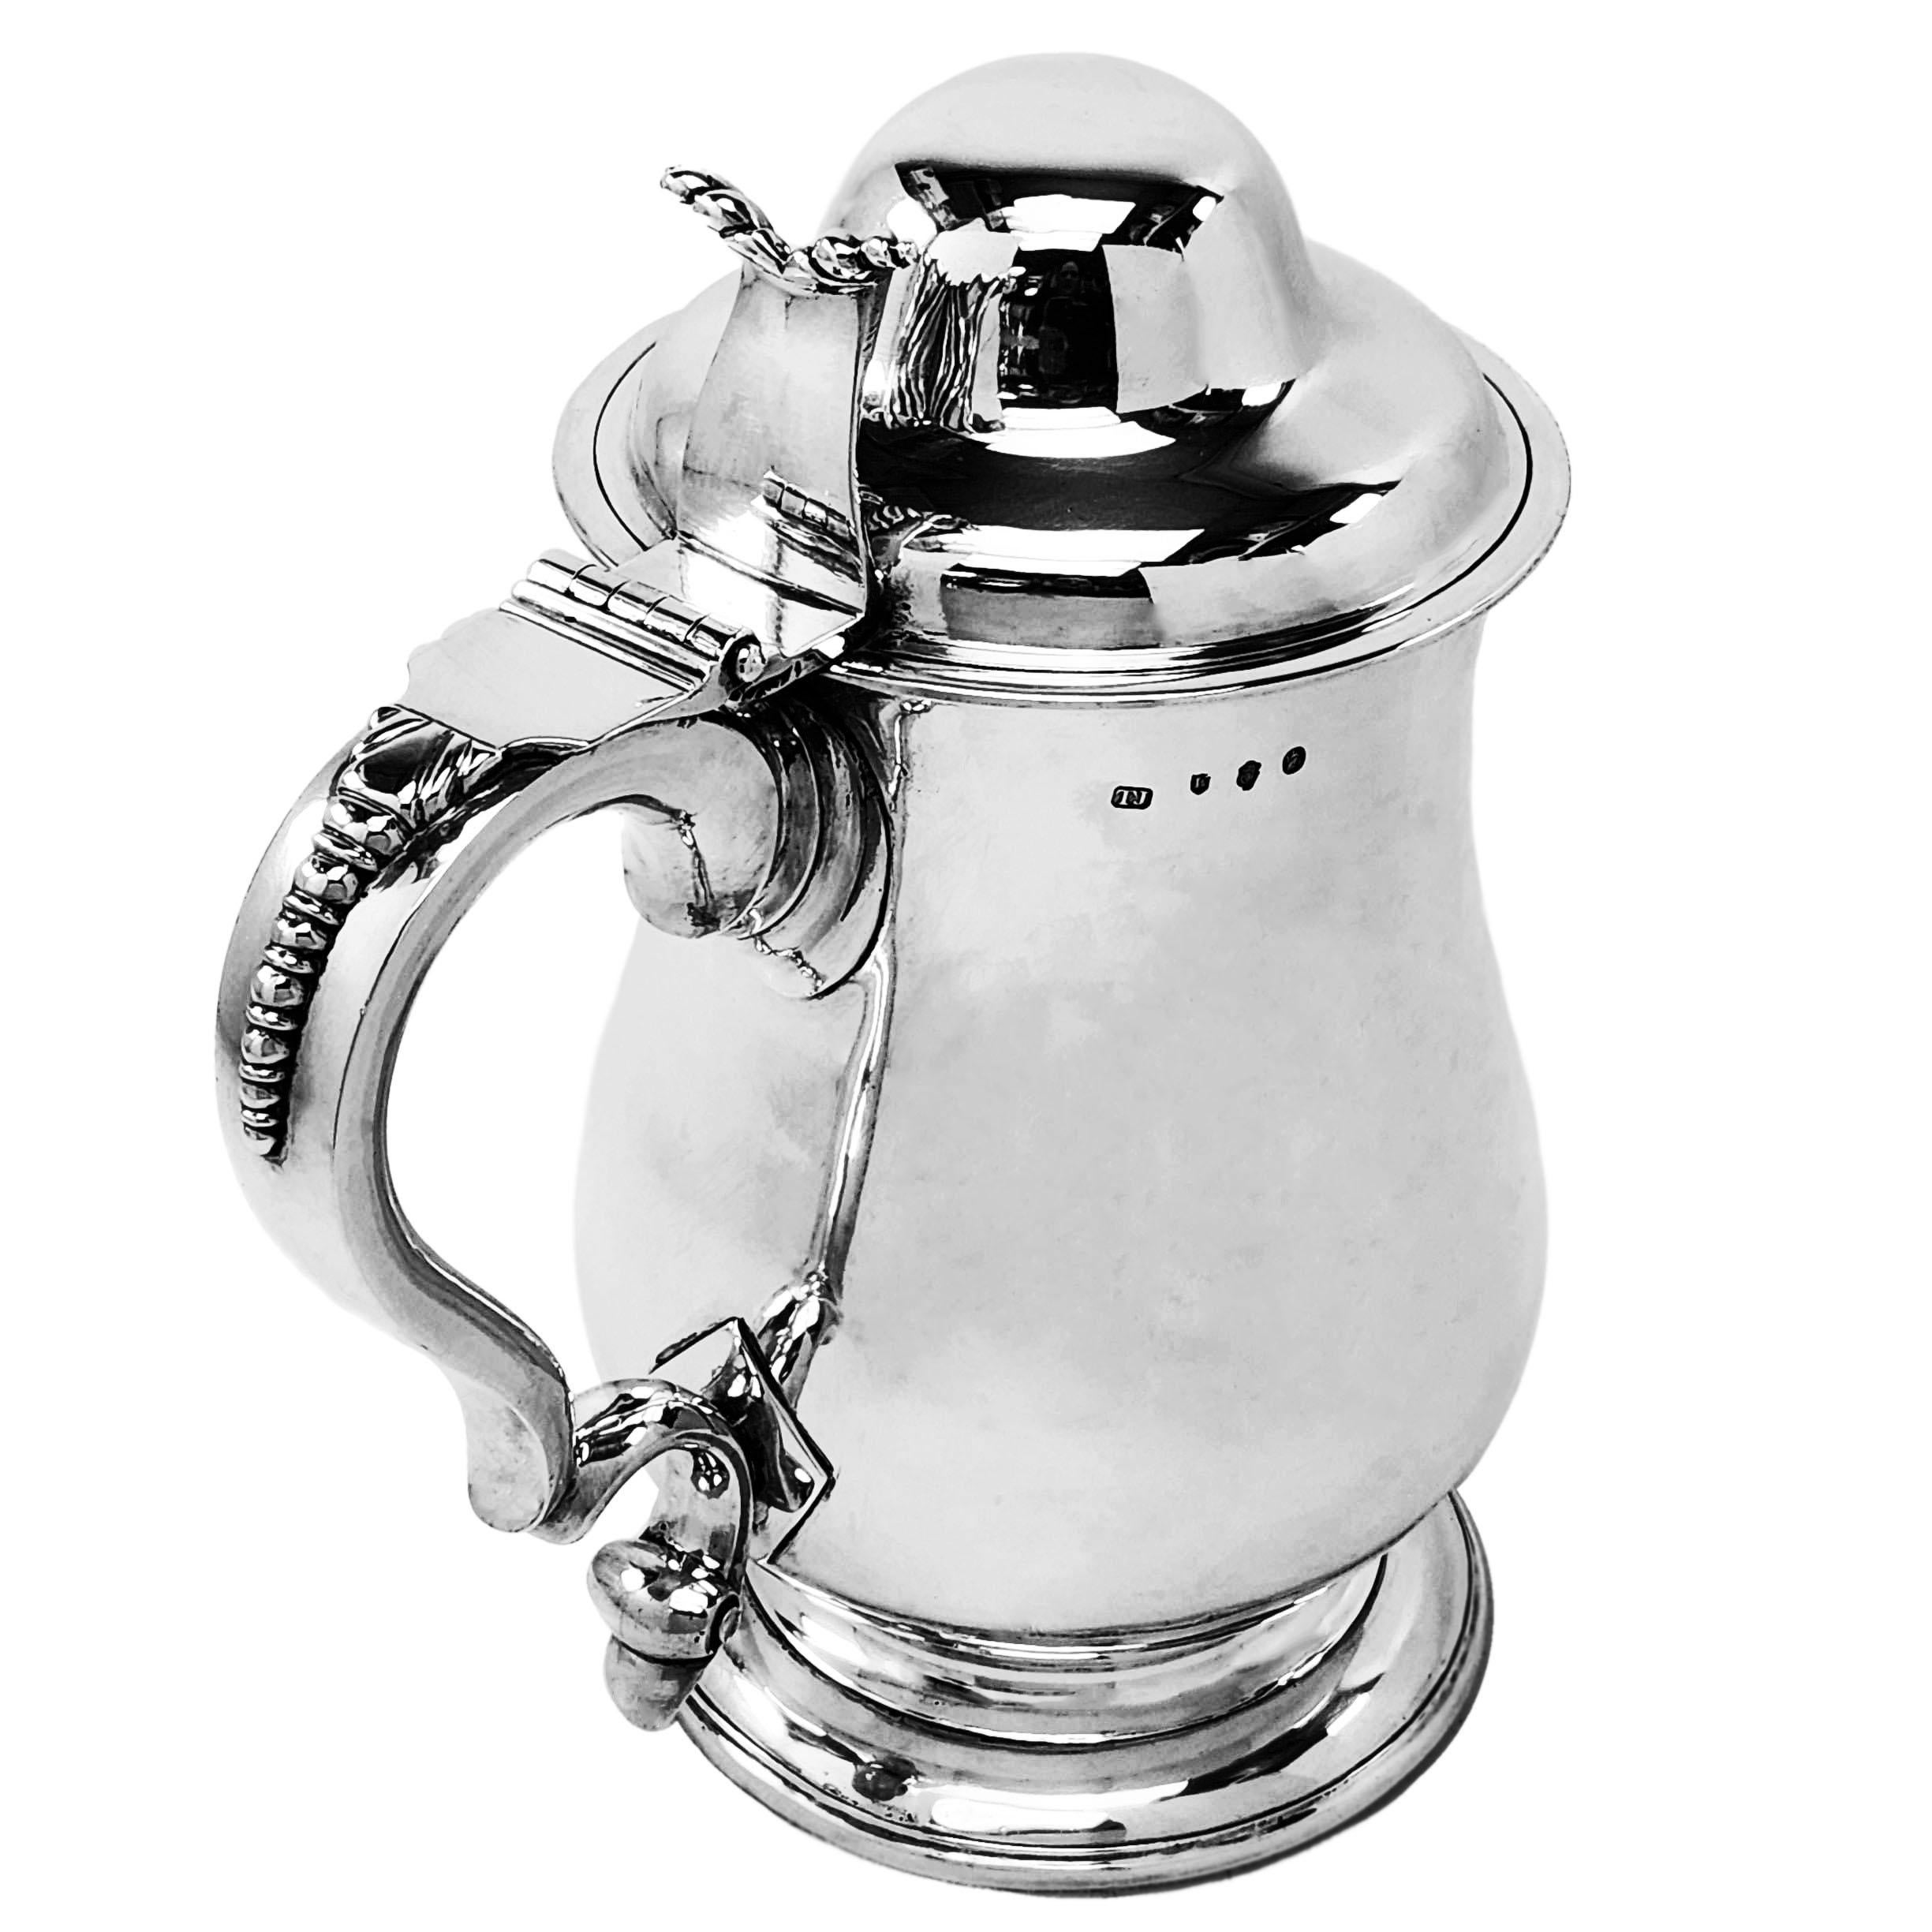 An impressive Antique Irish Silver Tankard in a classic baluster shape with a substantial domed lid. The Lidded Beer Tankard has a large crest engraved opposite the equally large scroll handle. This Tankard is of notably large size.

Made in Dublin,